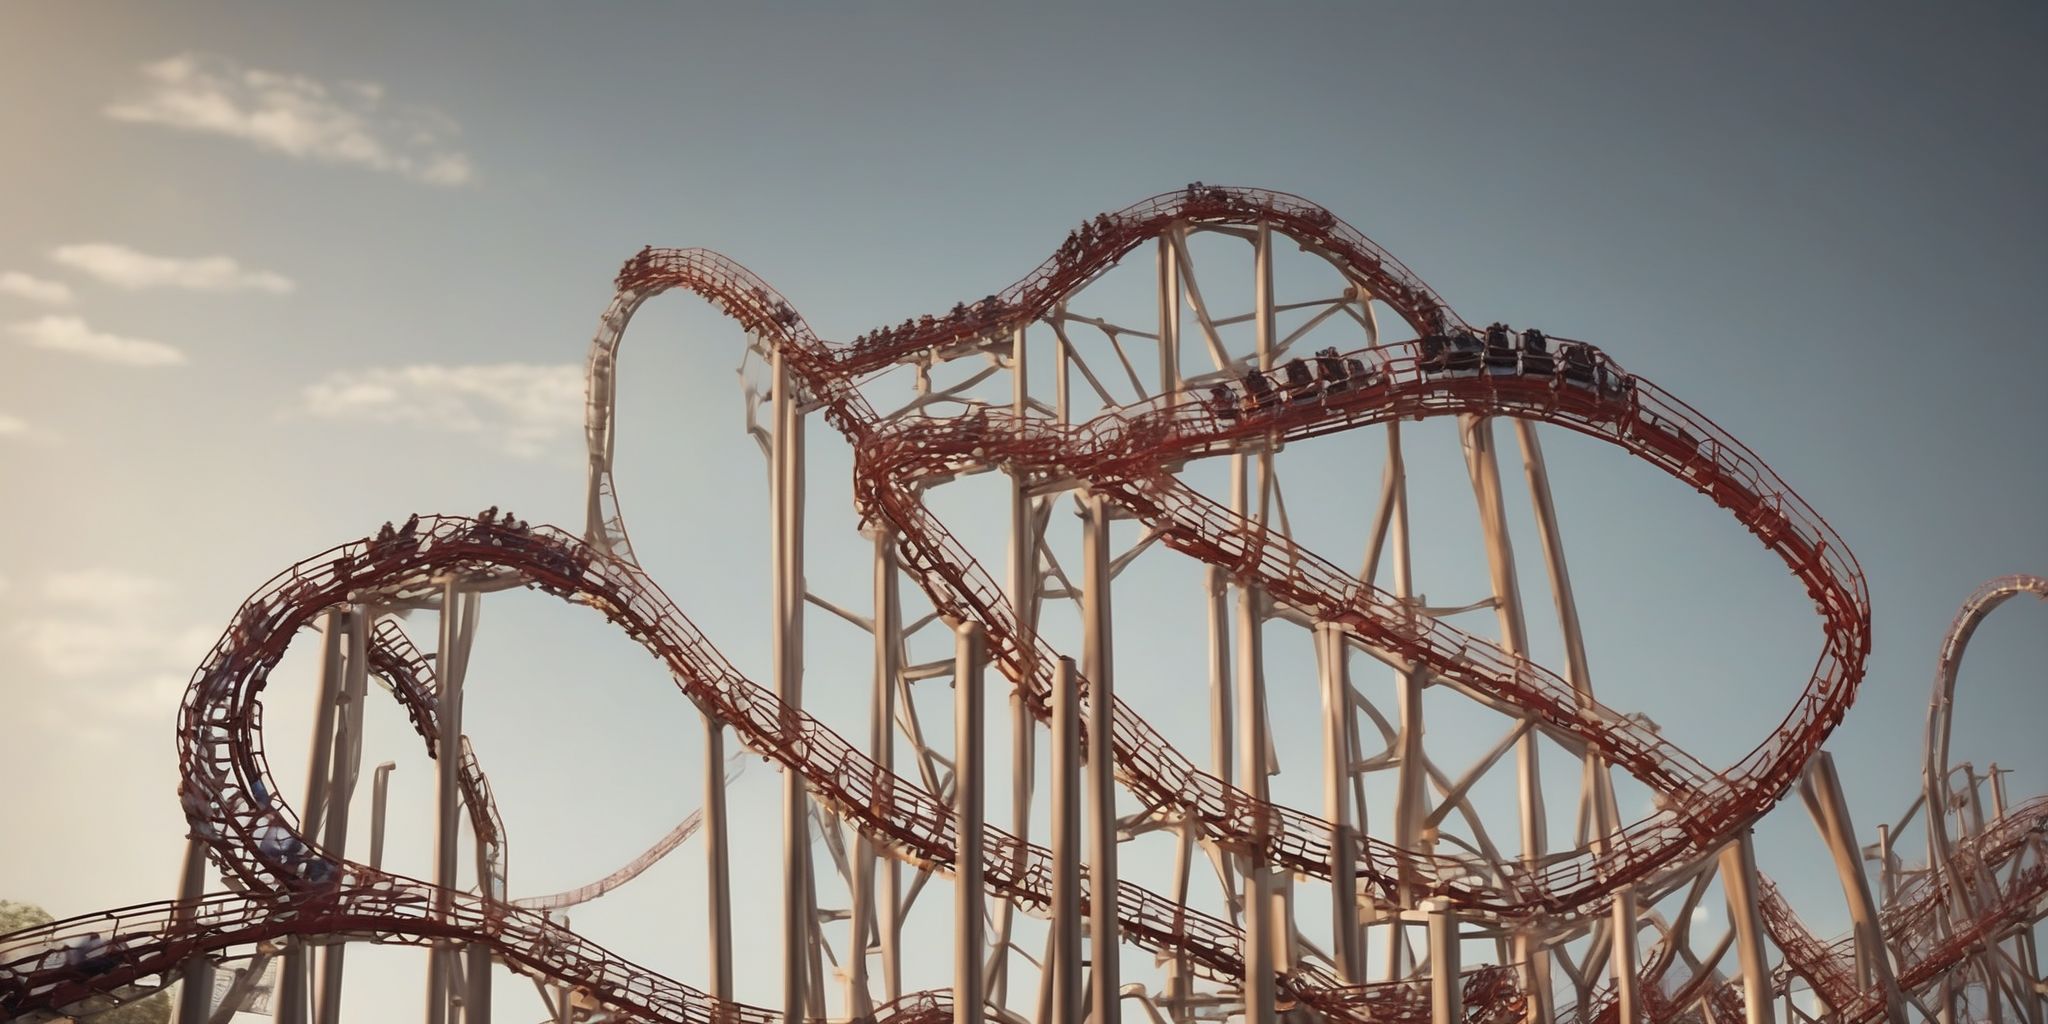 Rollercoaster  in realistic, photographic style